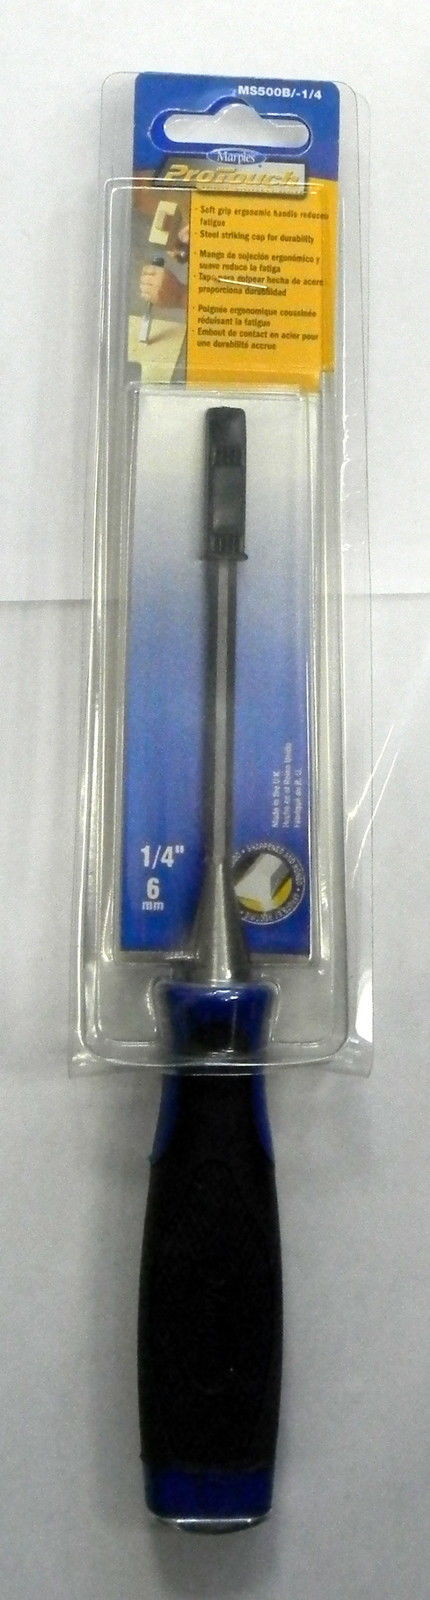 Irwin Marples MS500B/-1/4" Pro Touch Chisel With Striking Cap England